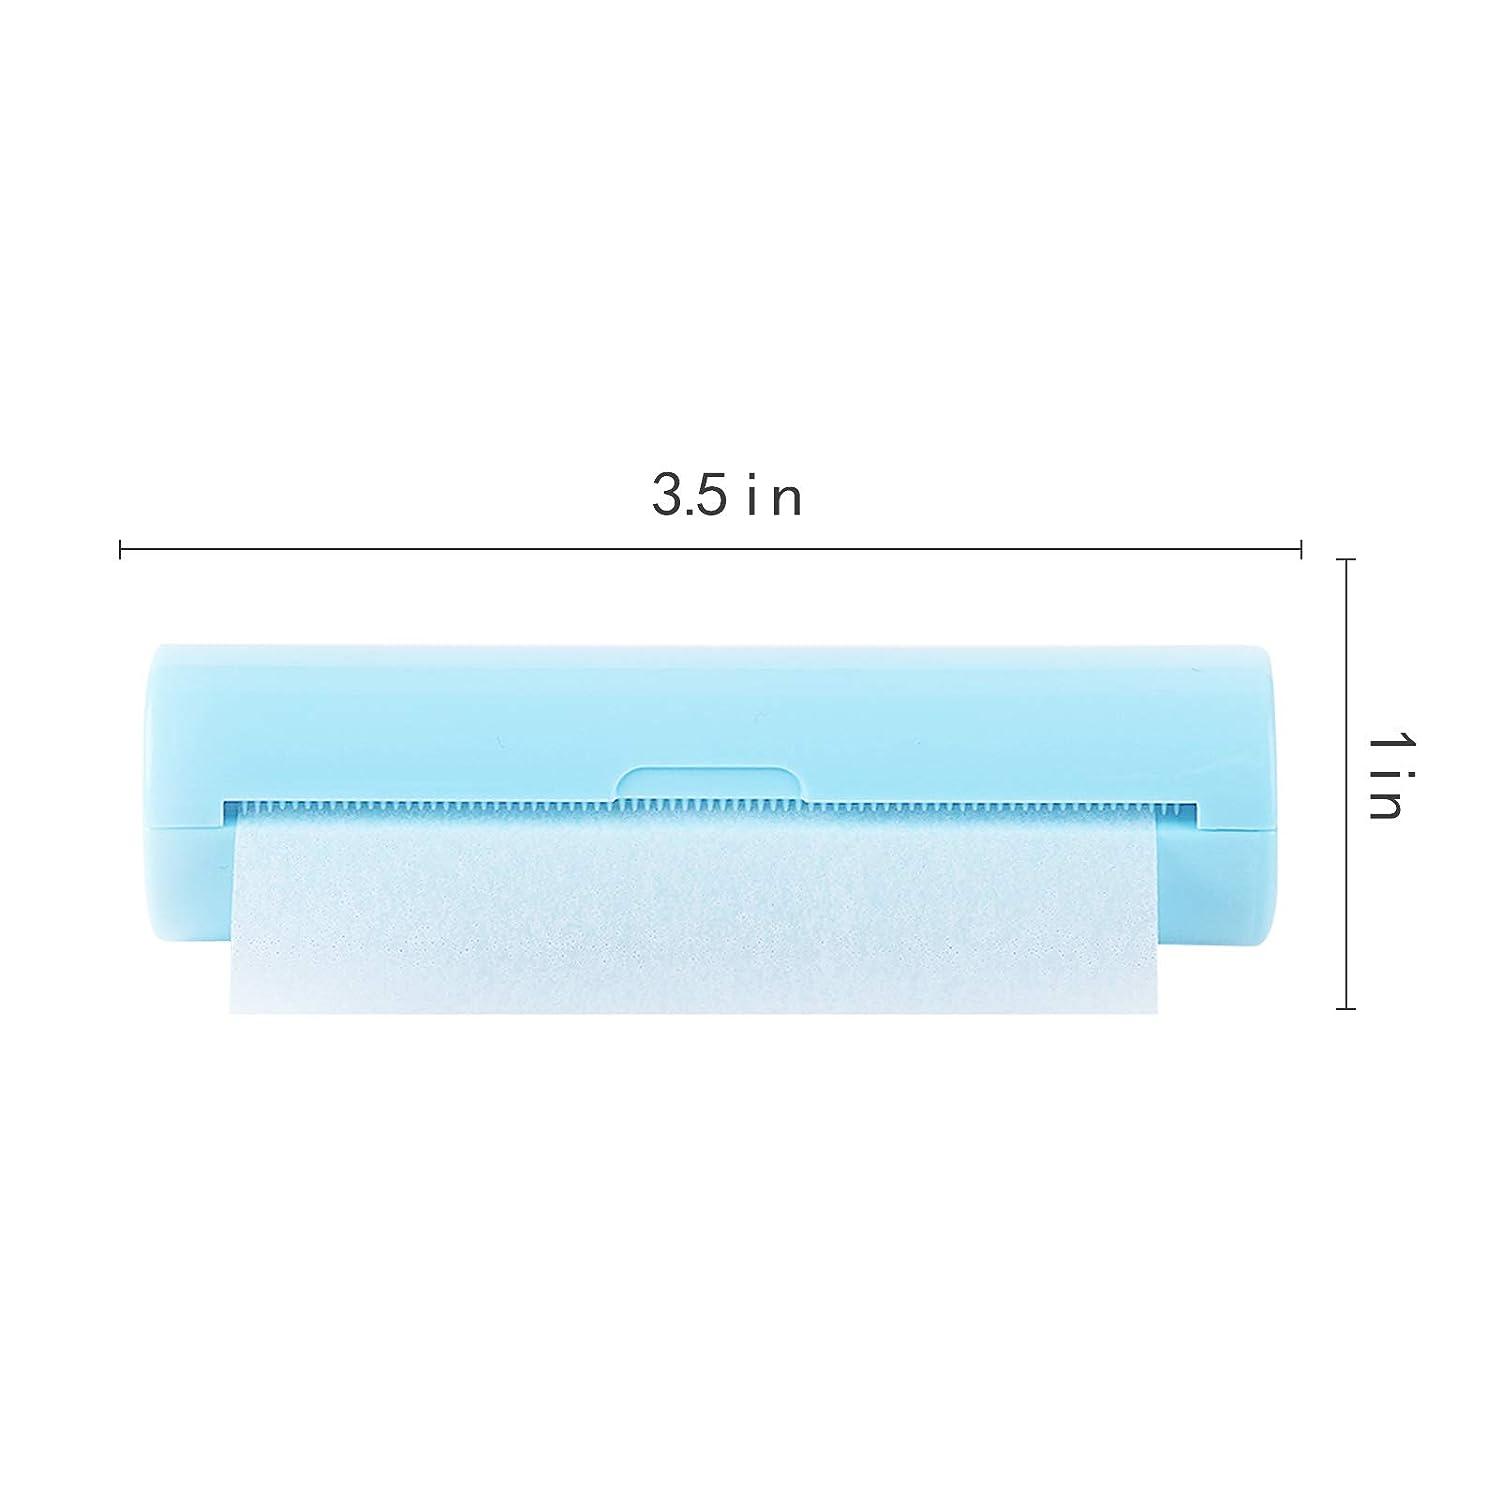  Iooresbeul 4 Pcs Rolling Papers Travel Soap Sheets Disposable  Hand Washing Paper Soap Mini Travel Items for Travel, Outdoor, Classes and  Work : Beauty & Personal Care